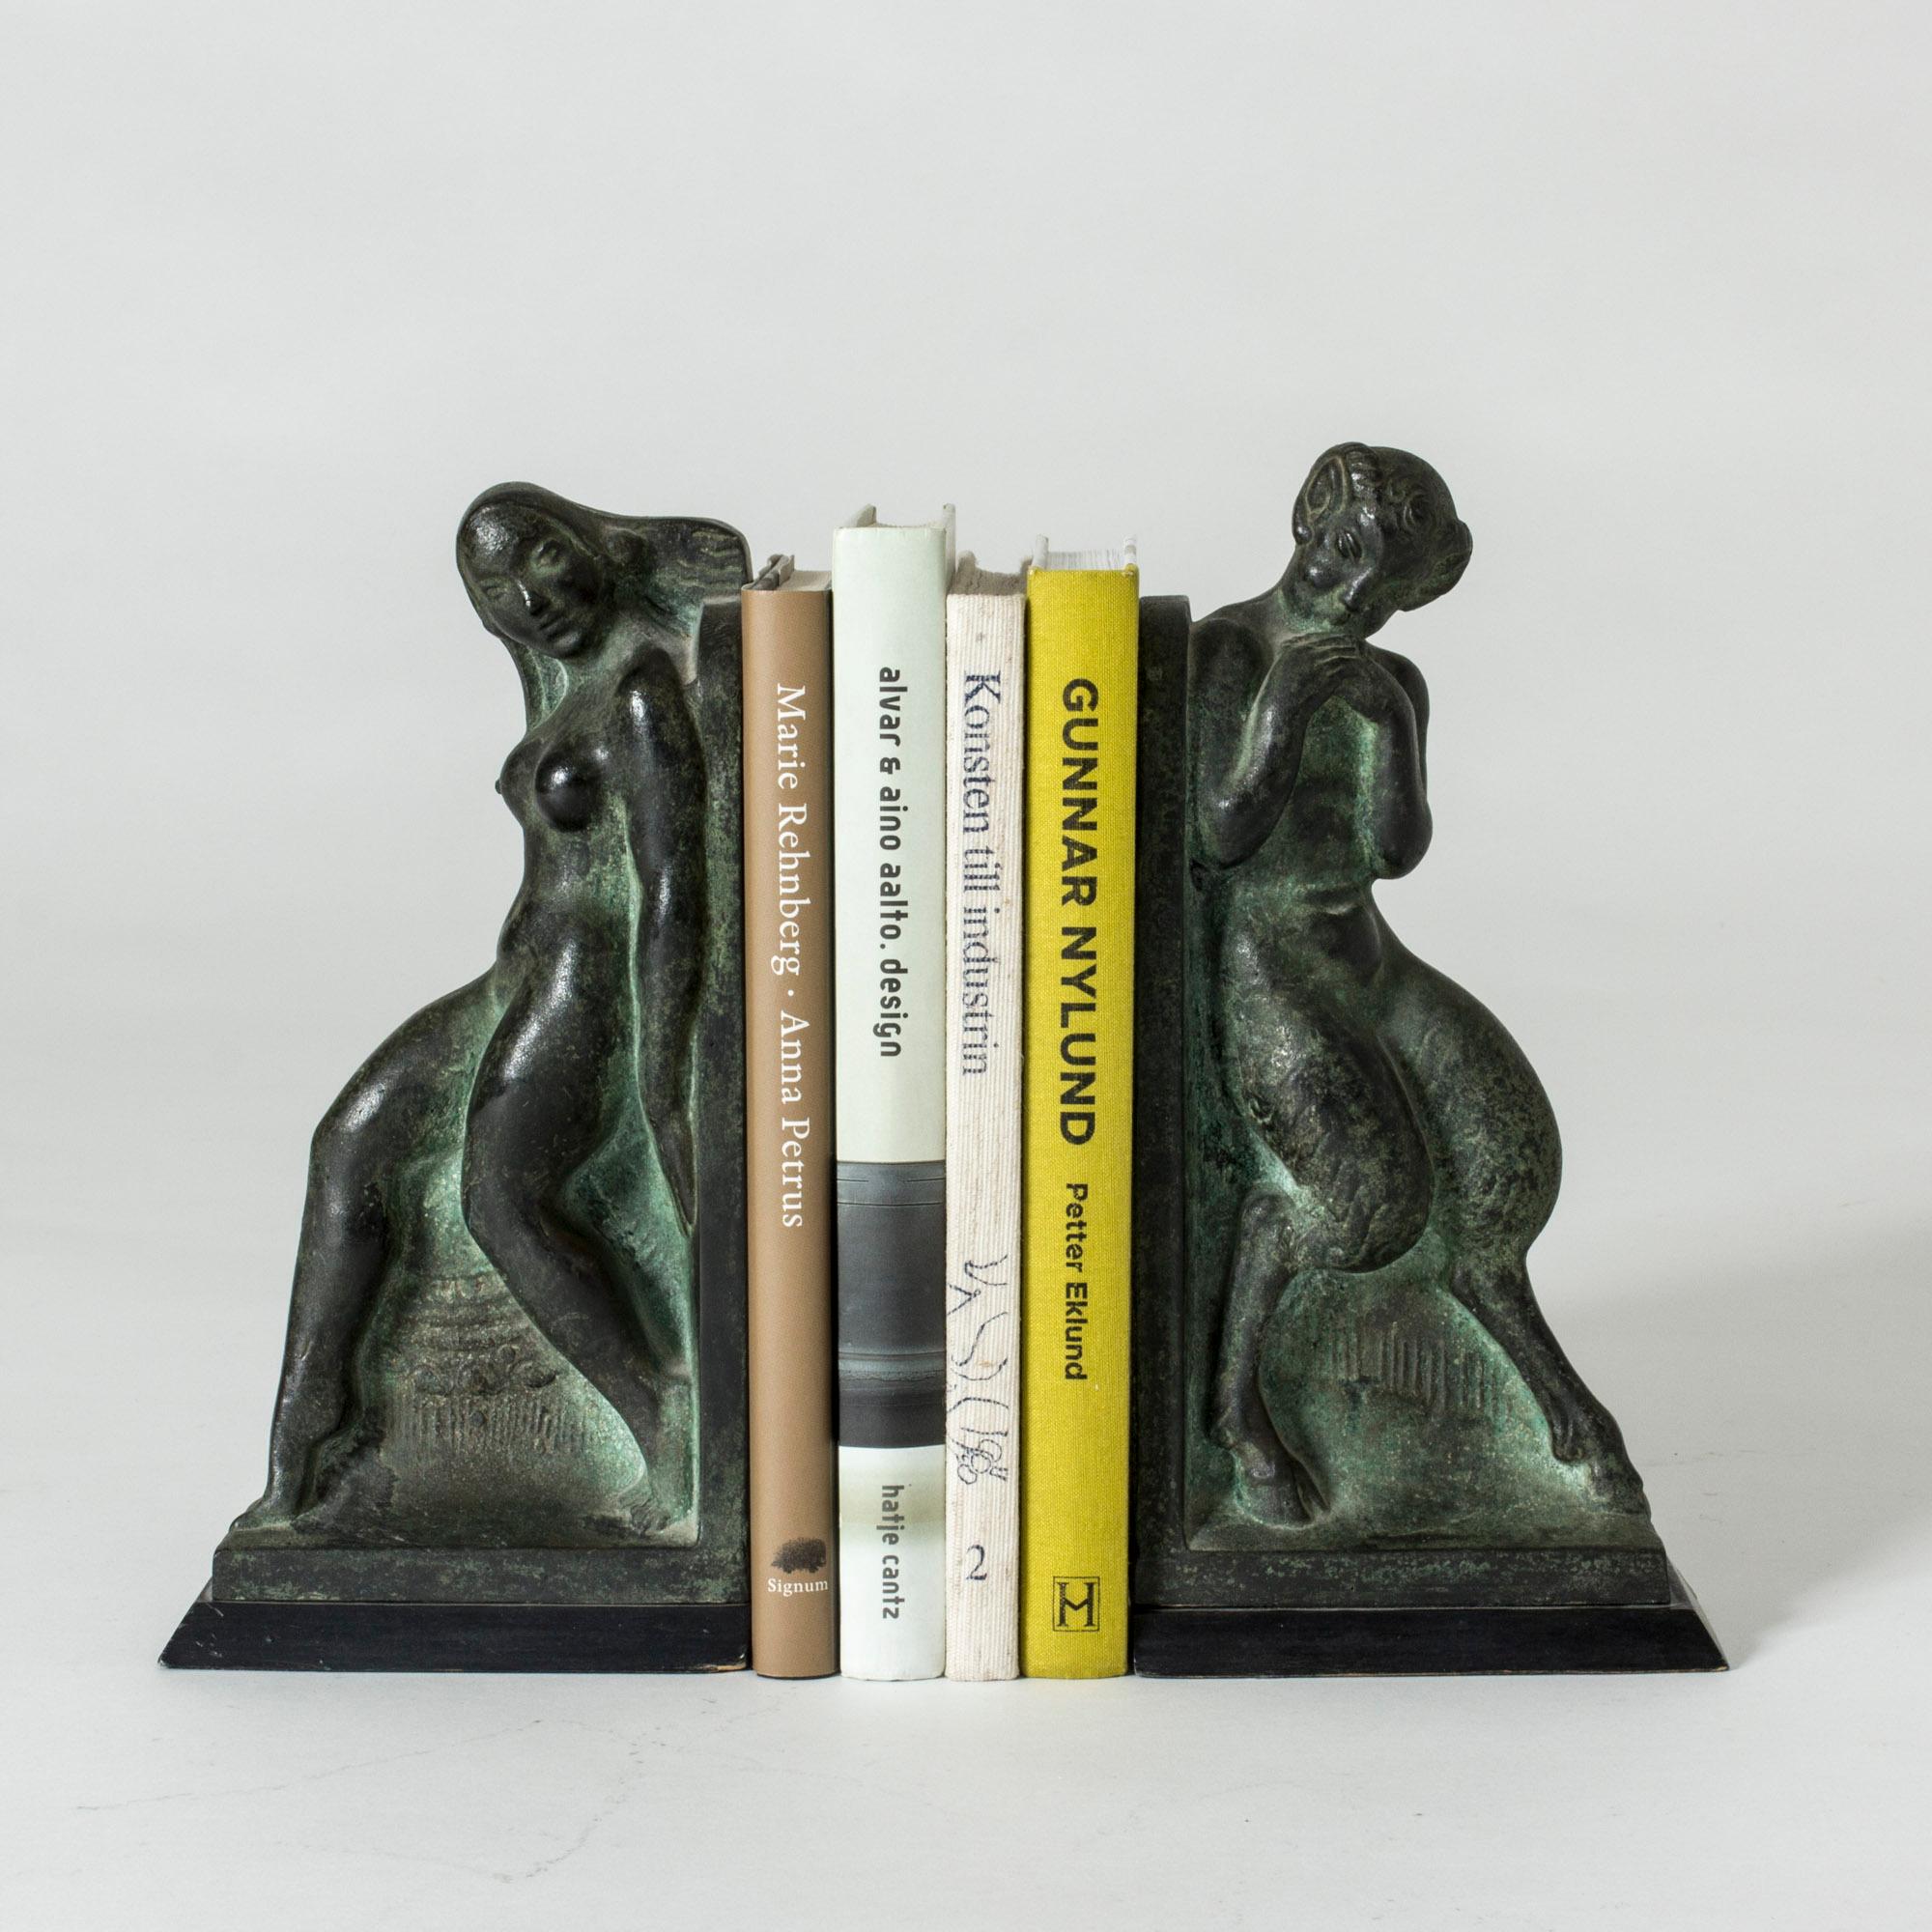 Pair of gorgeous patinated bronze bookends by Axel Gute. They are in the shape of Syrinx and Pan from Greek mythology, beautifully made so that one can really imagine the story that is played out between them.